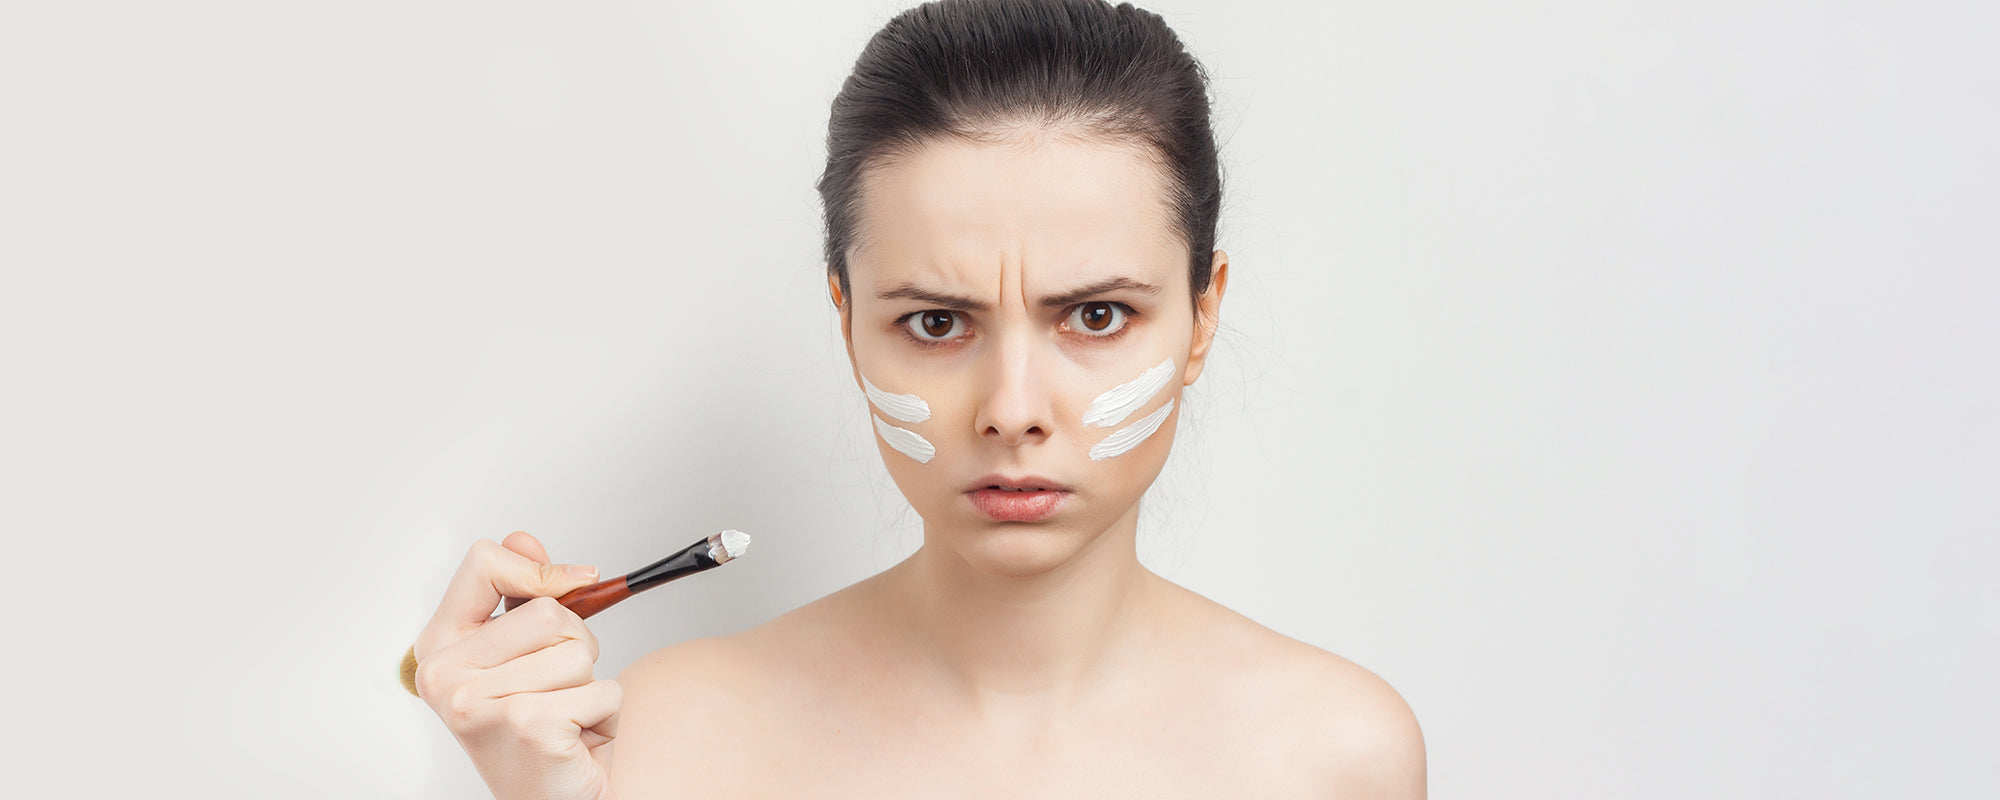 Retinol for Acne: Does it Work?